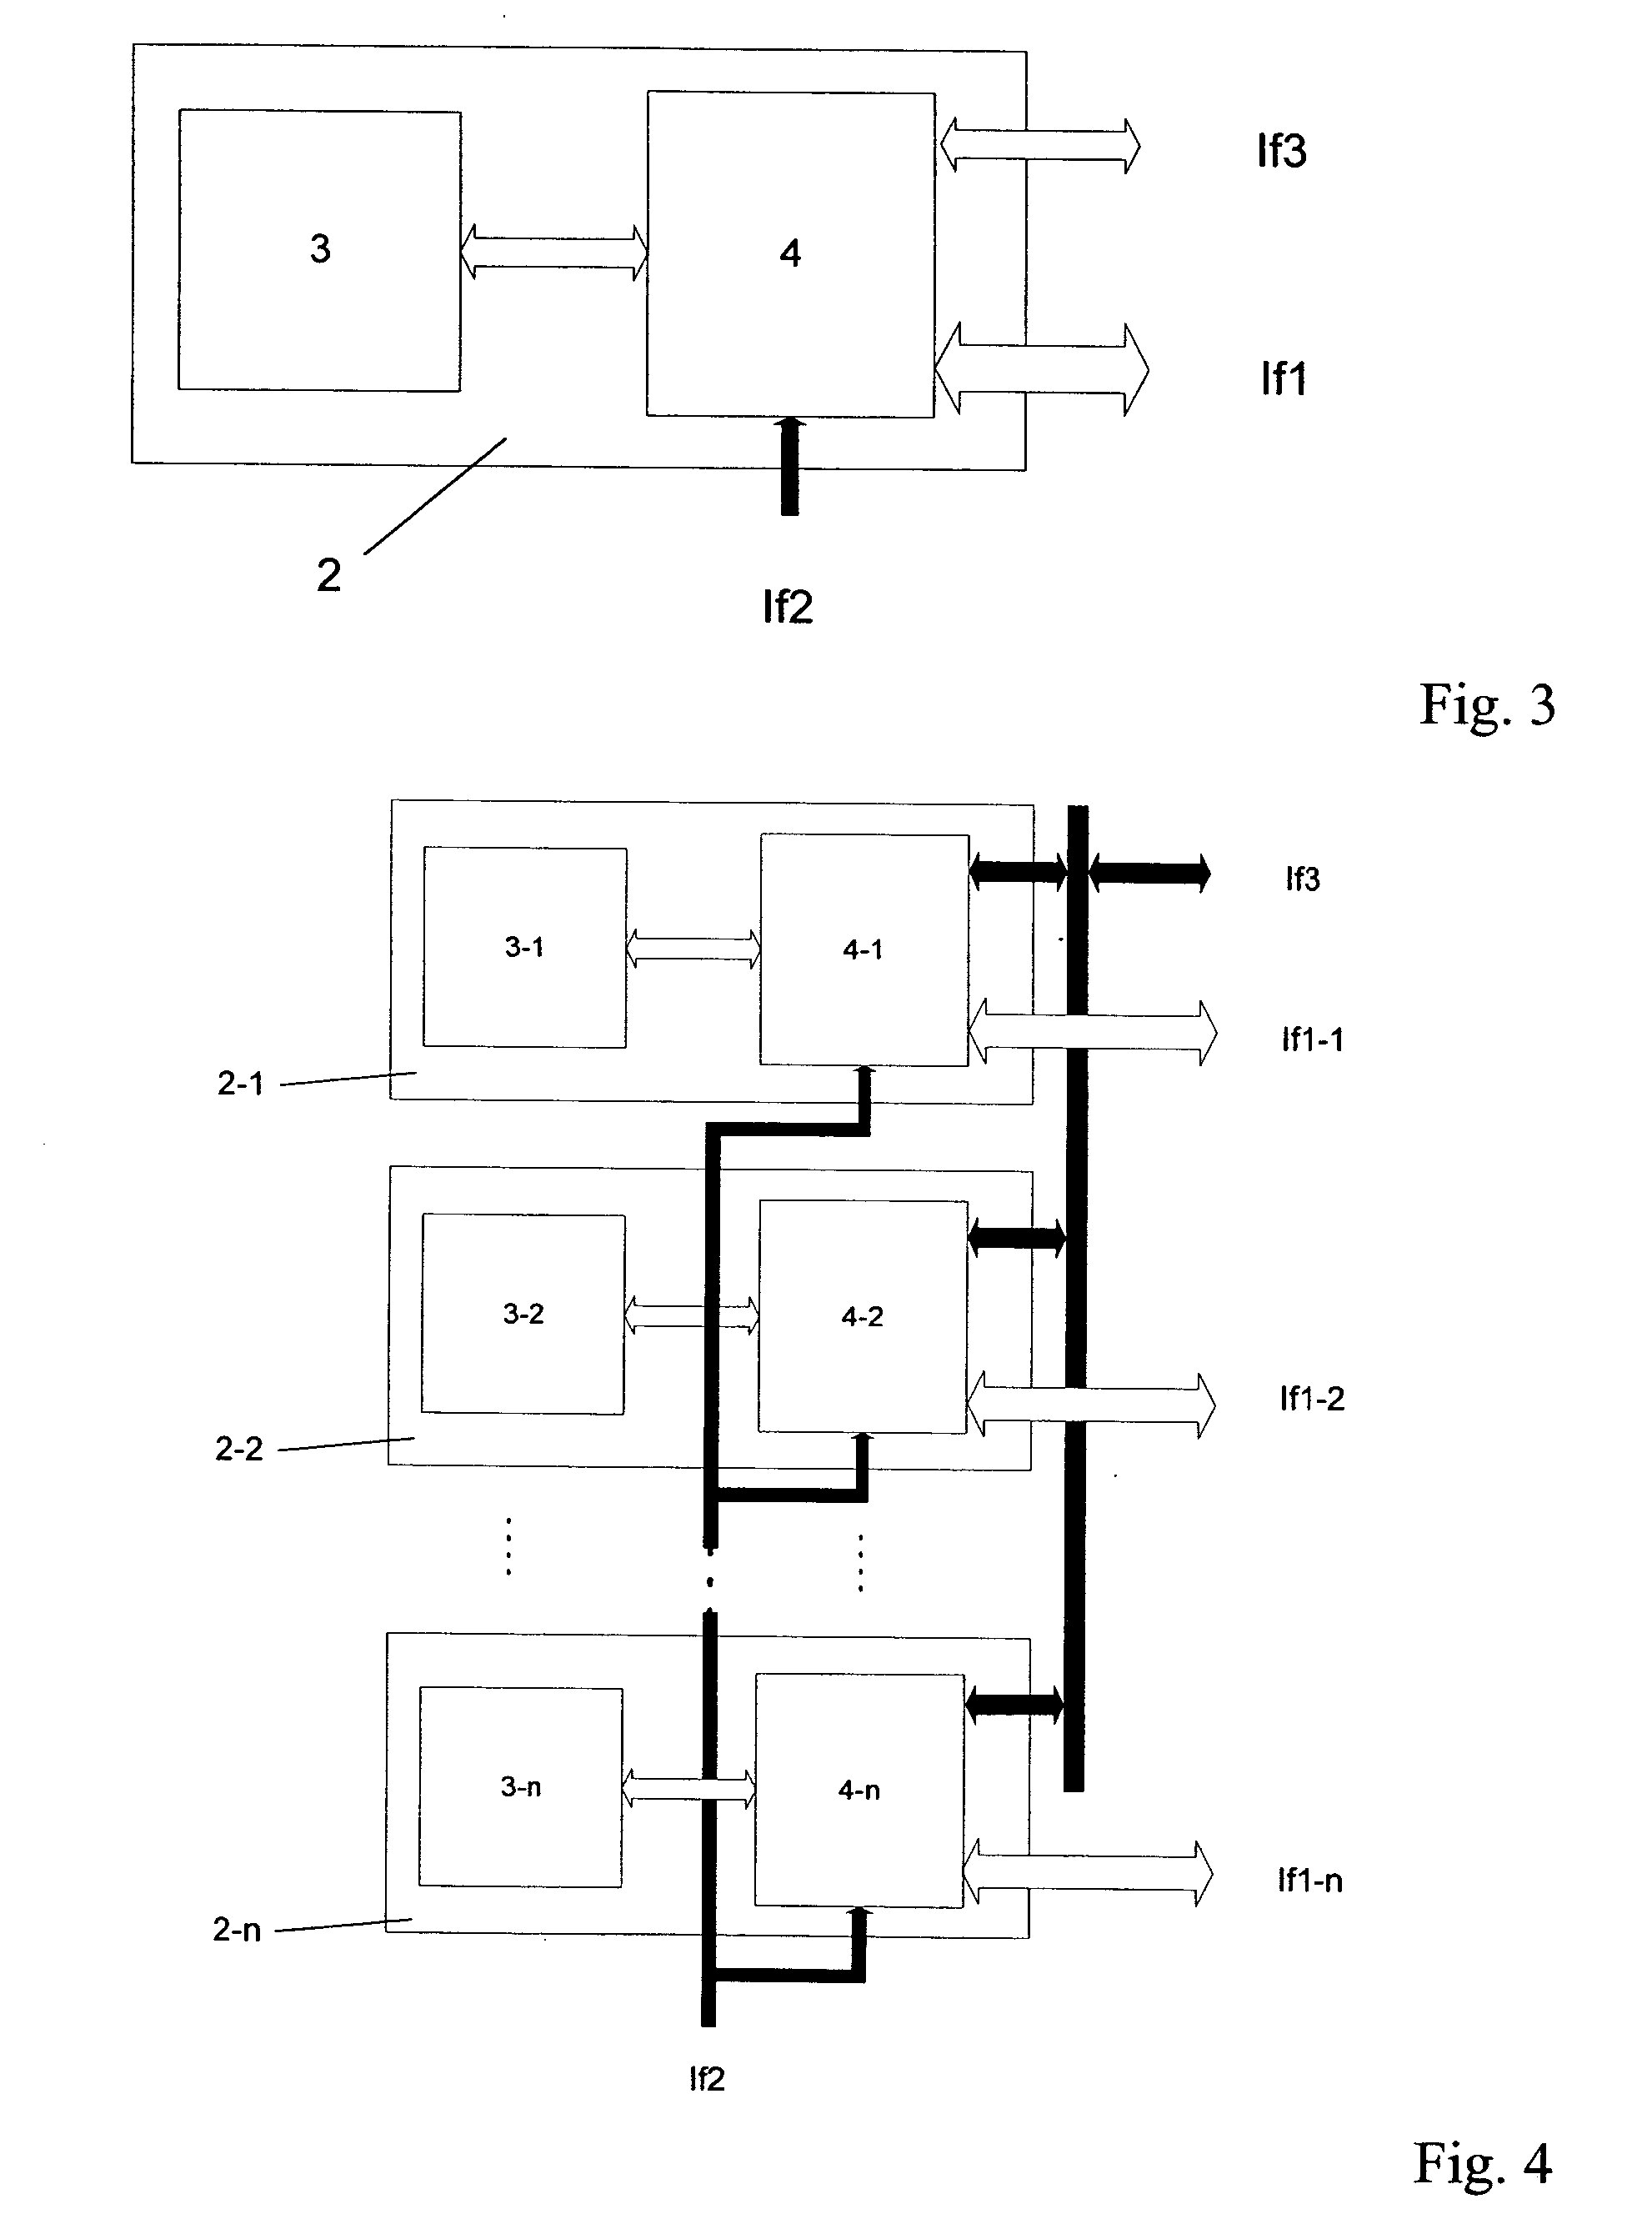 Processing of data frames exchanged over a communication controller in a time-triggered system